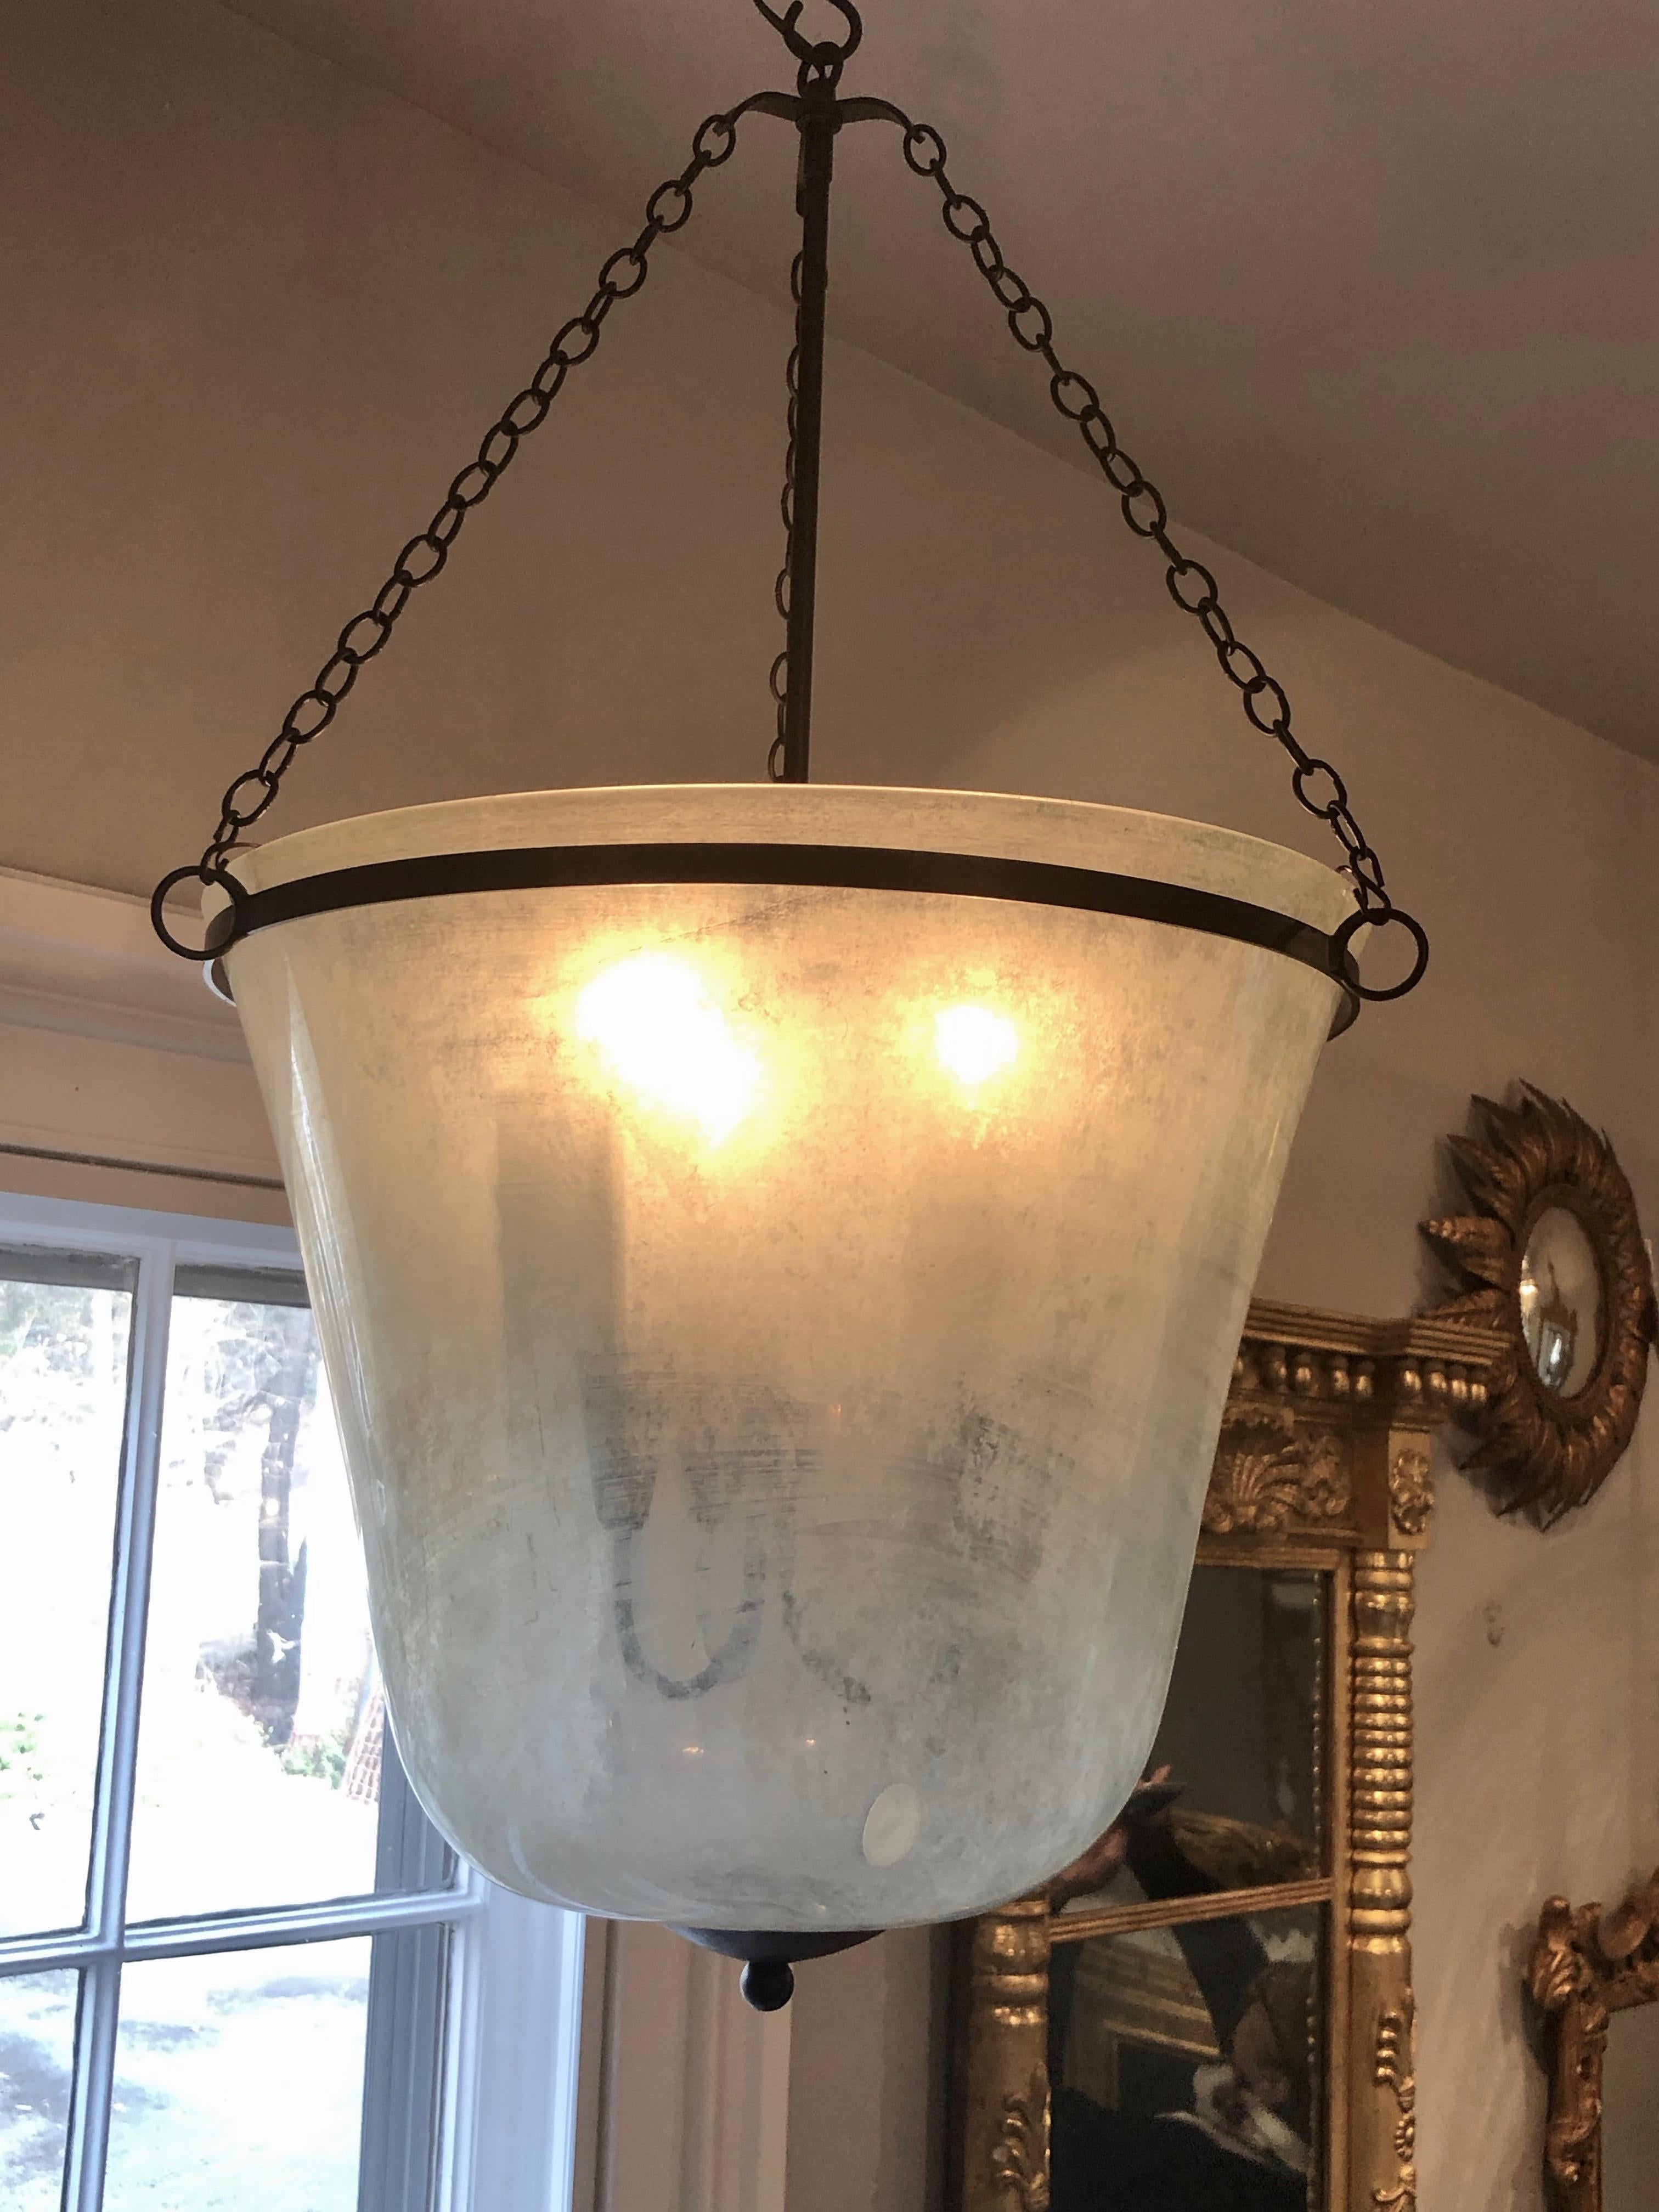 We have always had a thing for hand blown French garden cloches that come in two configurations, bell form and melon form. This one is a bell cloche (a little taller and more narrow than a melon cloche) and it has been converted into a hanging light